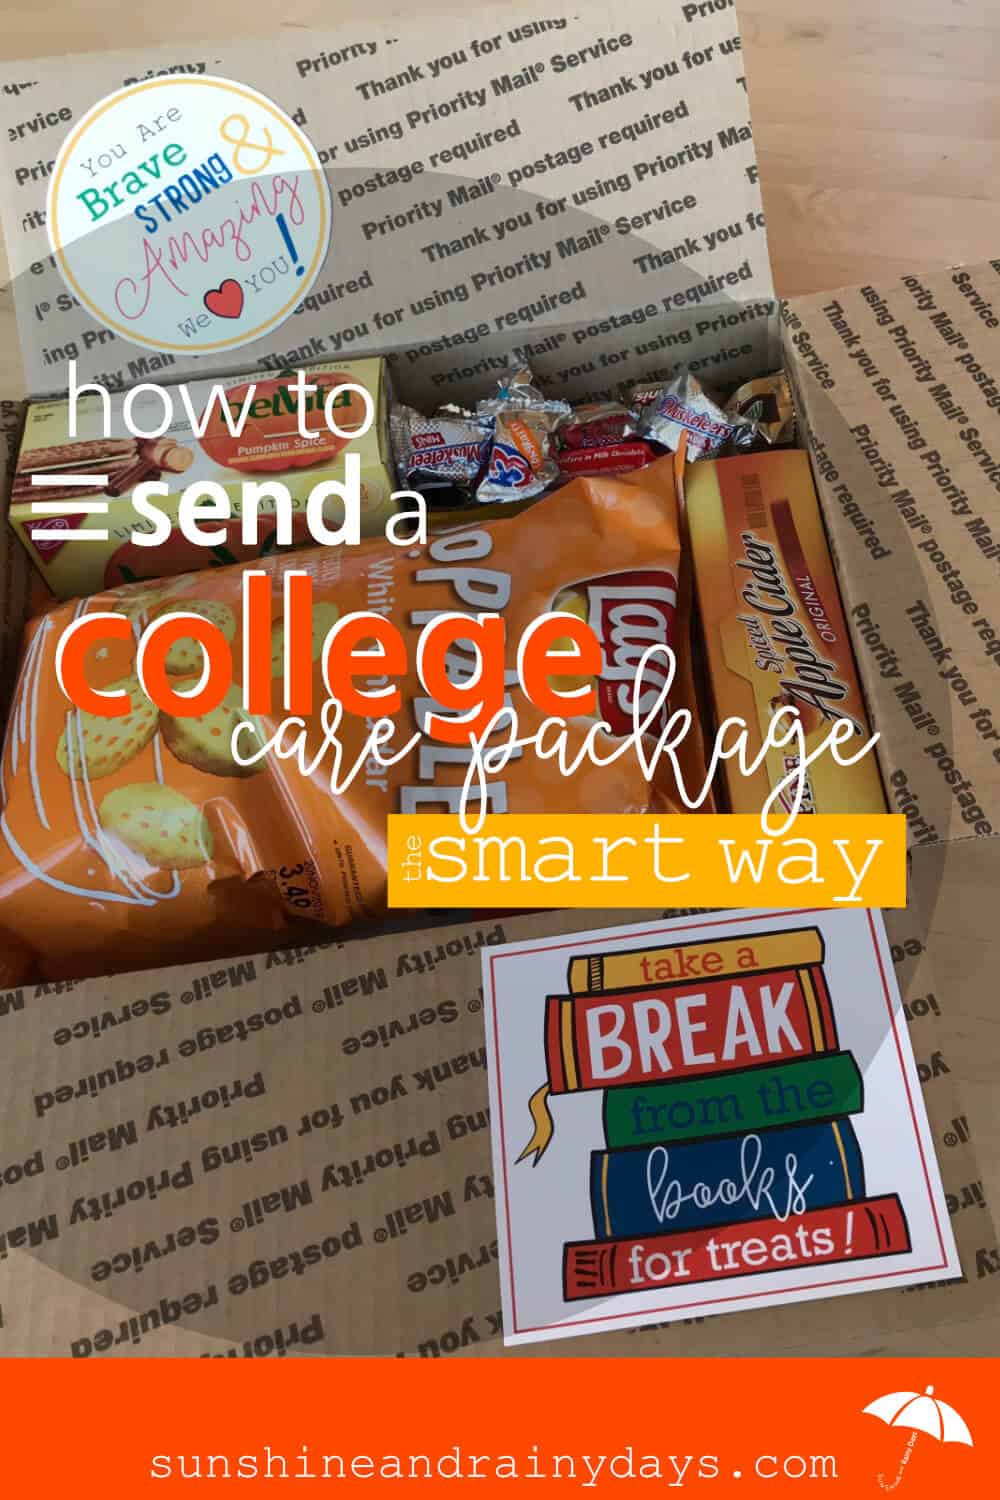 how to send a college care package the smart way - sunshine and